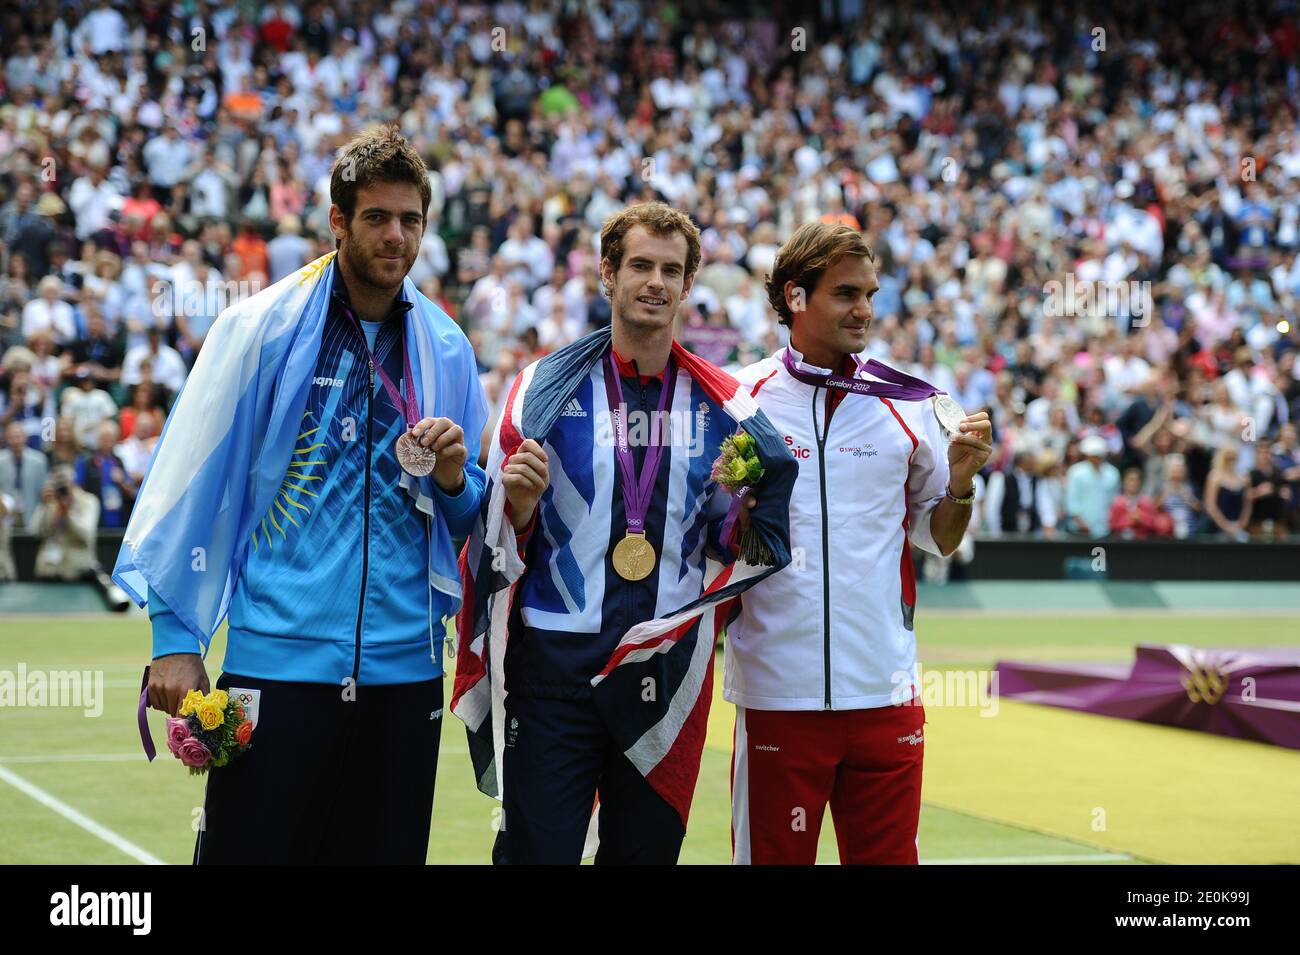 Gold medalist Andy Murray (C) of Britain, silver medalist Roger Federer (L)  of Switzerland, and bronze medalist Juan Martin del Potro of Argentina pose  at awarding ceremony after the Final of the